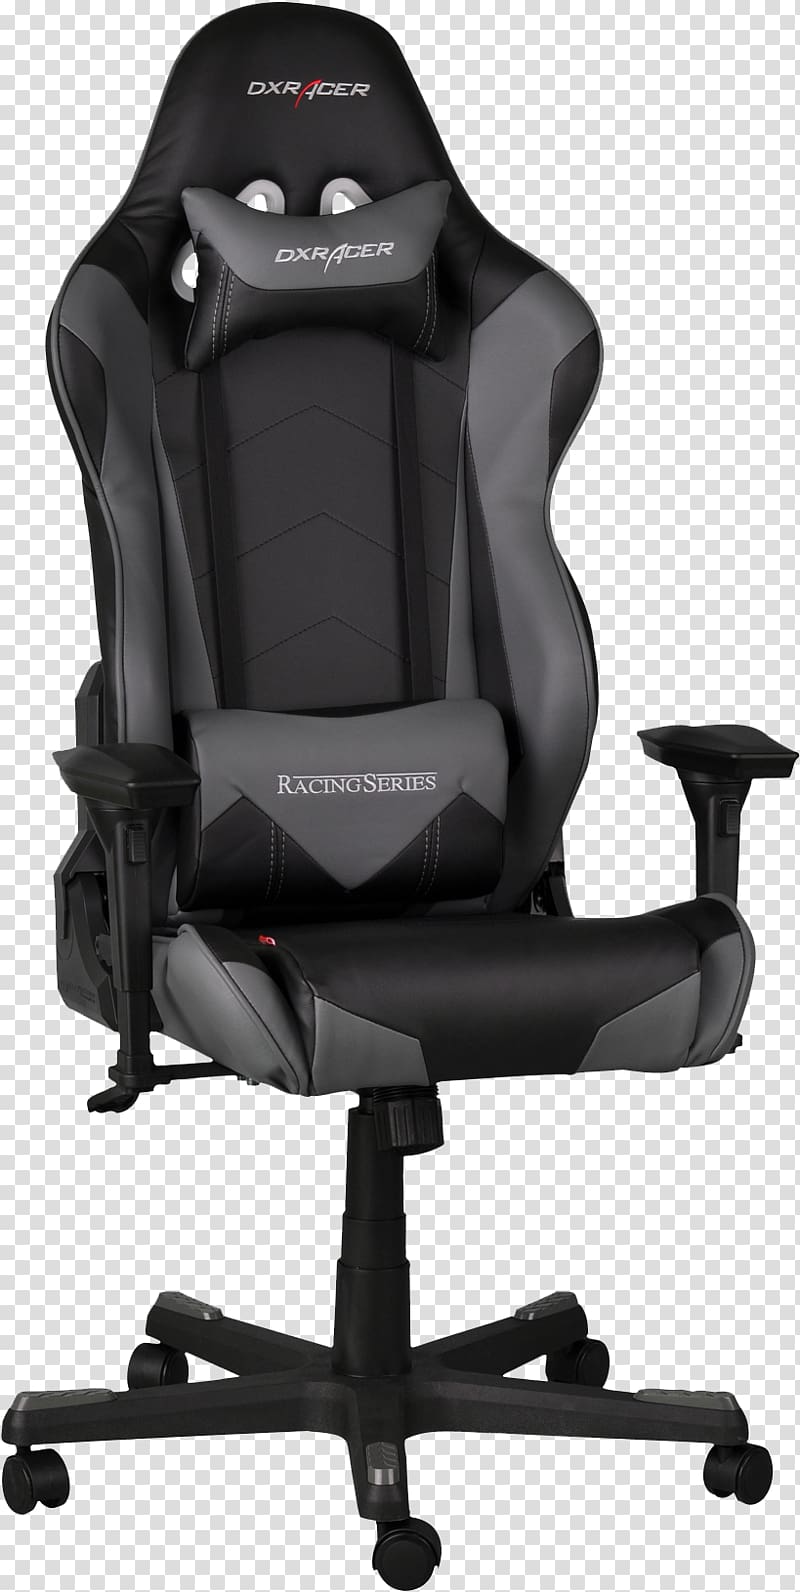 Office & Desk Chairs Gaming chair Swivel chair DXRacer, chair transparent background PNG clipart